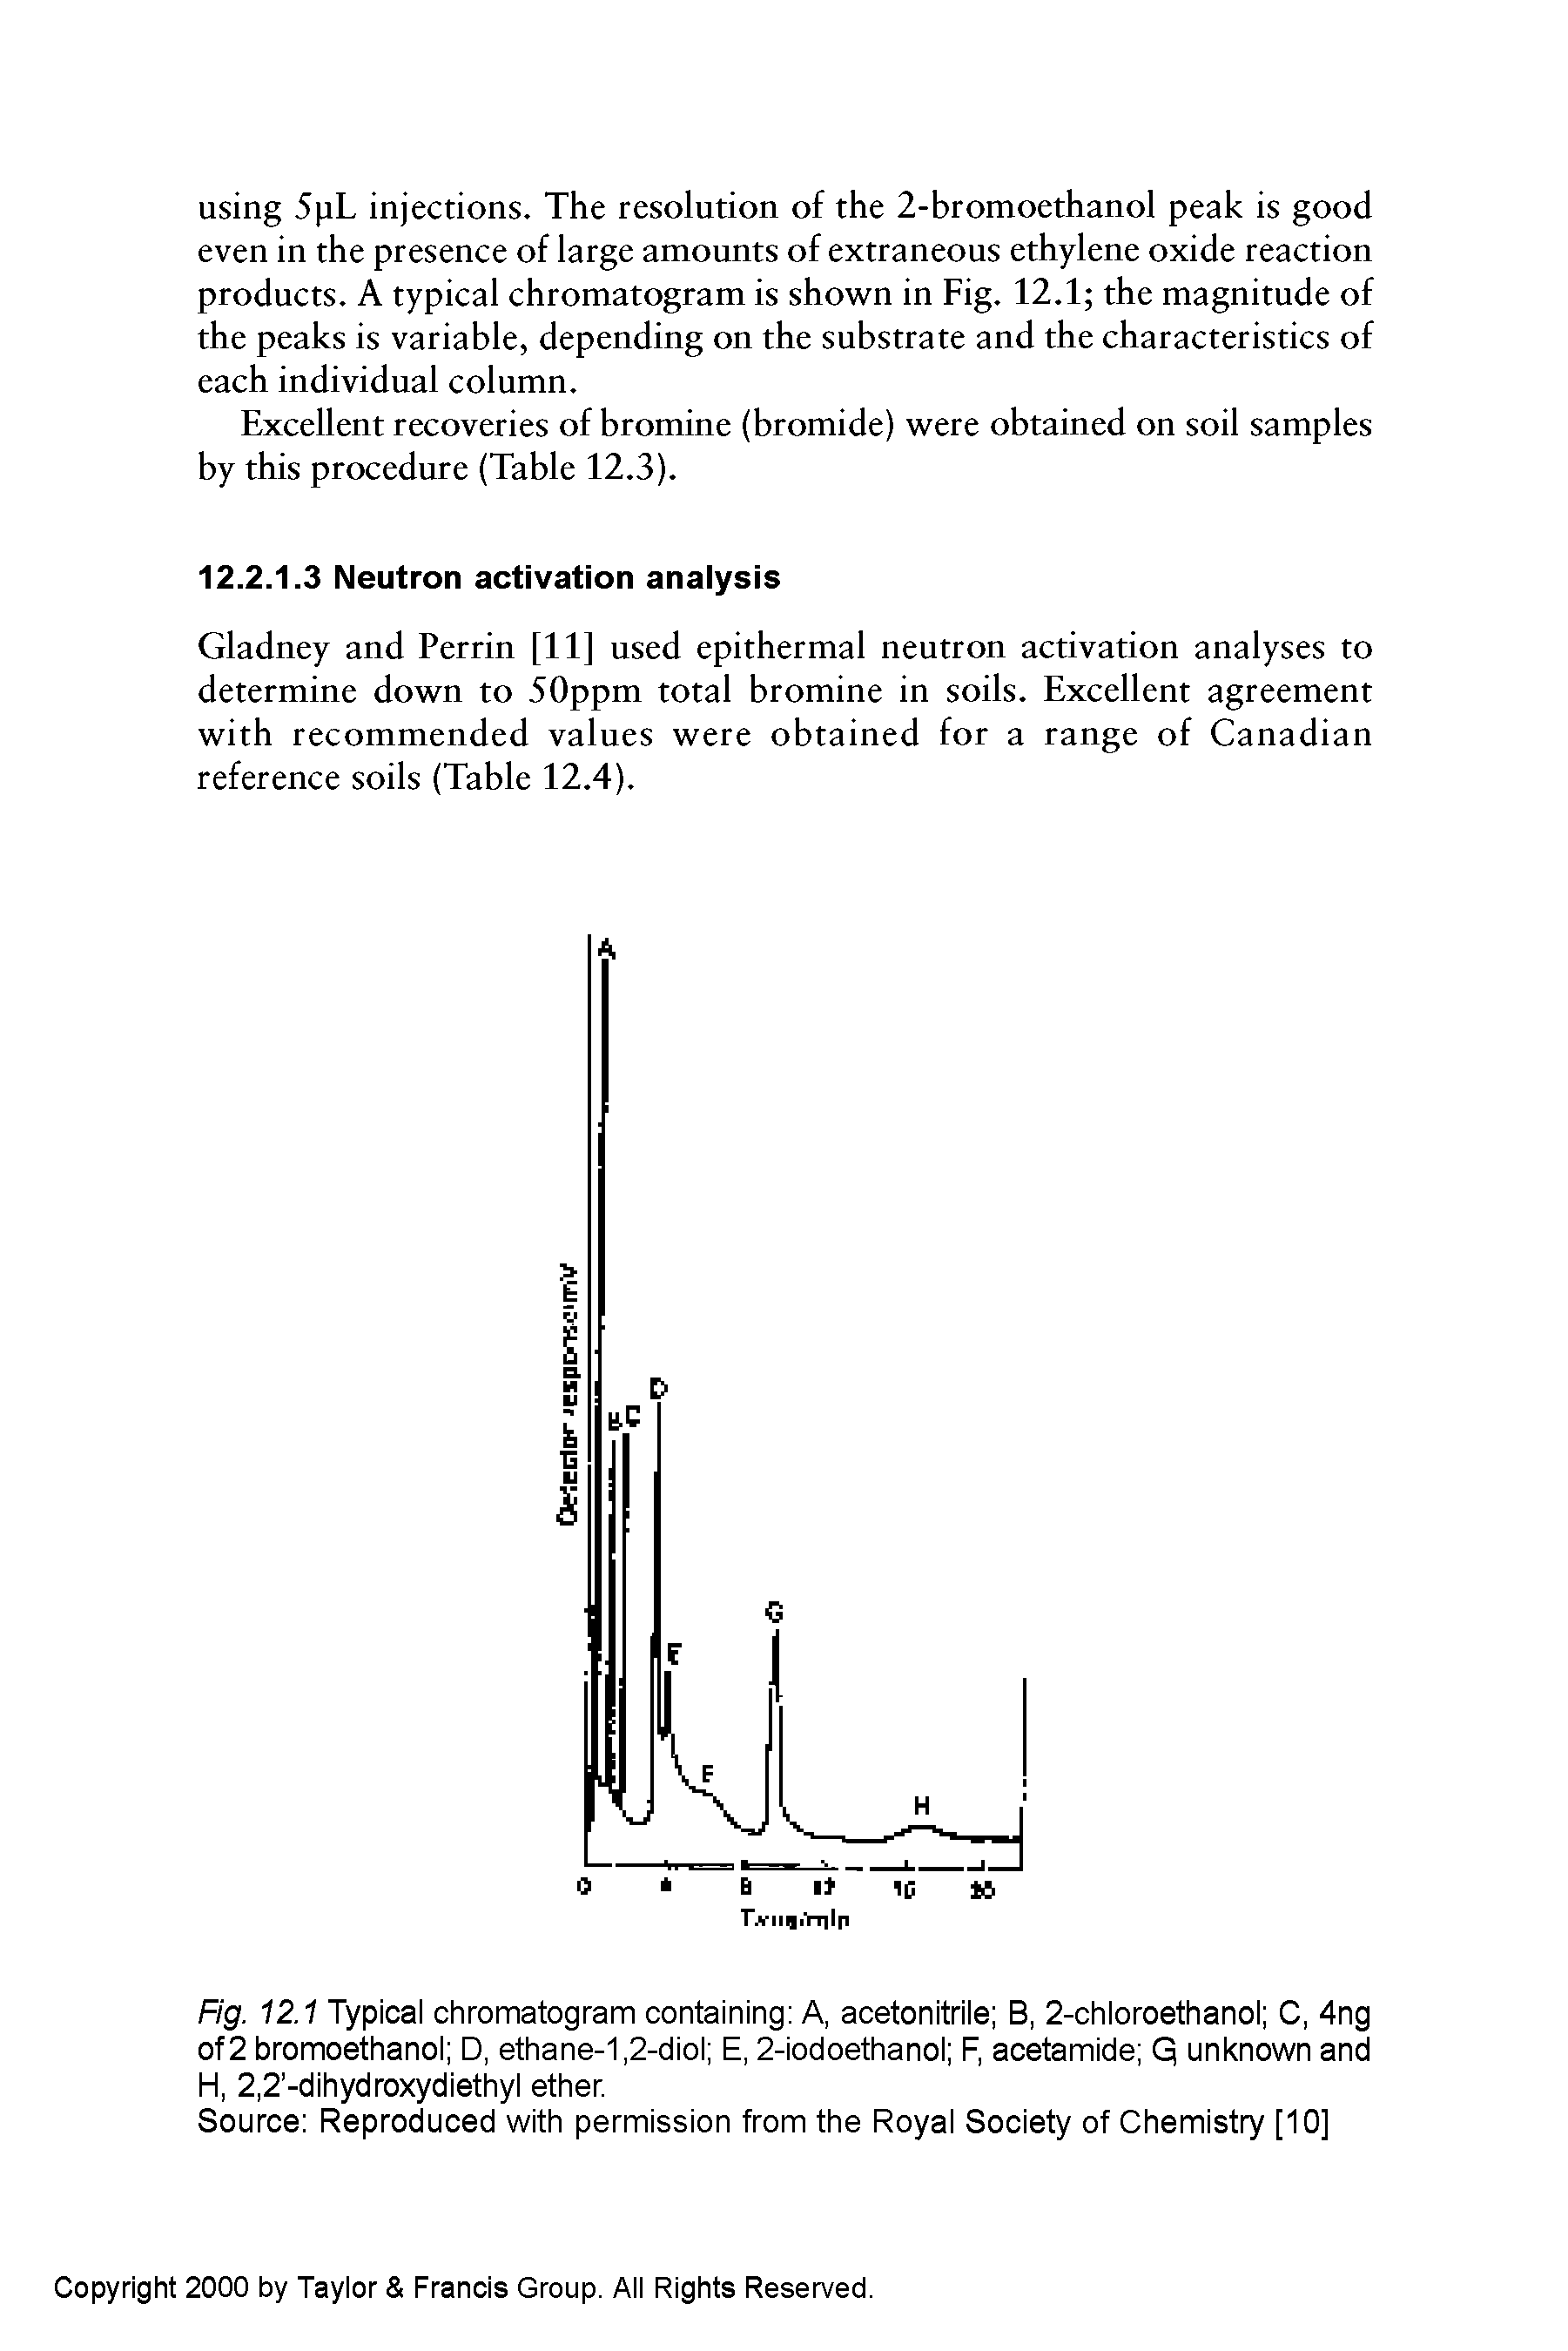 Fig. 12.1 Typical chromatogram containing A, acetonitrile B, 2-chloroethanol C, 4ng of 2 bromoethanol D, ethane-1,2-diol E, 2-iodoethanol F, acetamide Q unknown and H, 2,2 -dihydroxydiethyl ether.